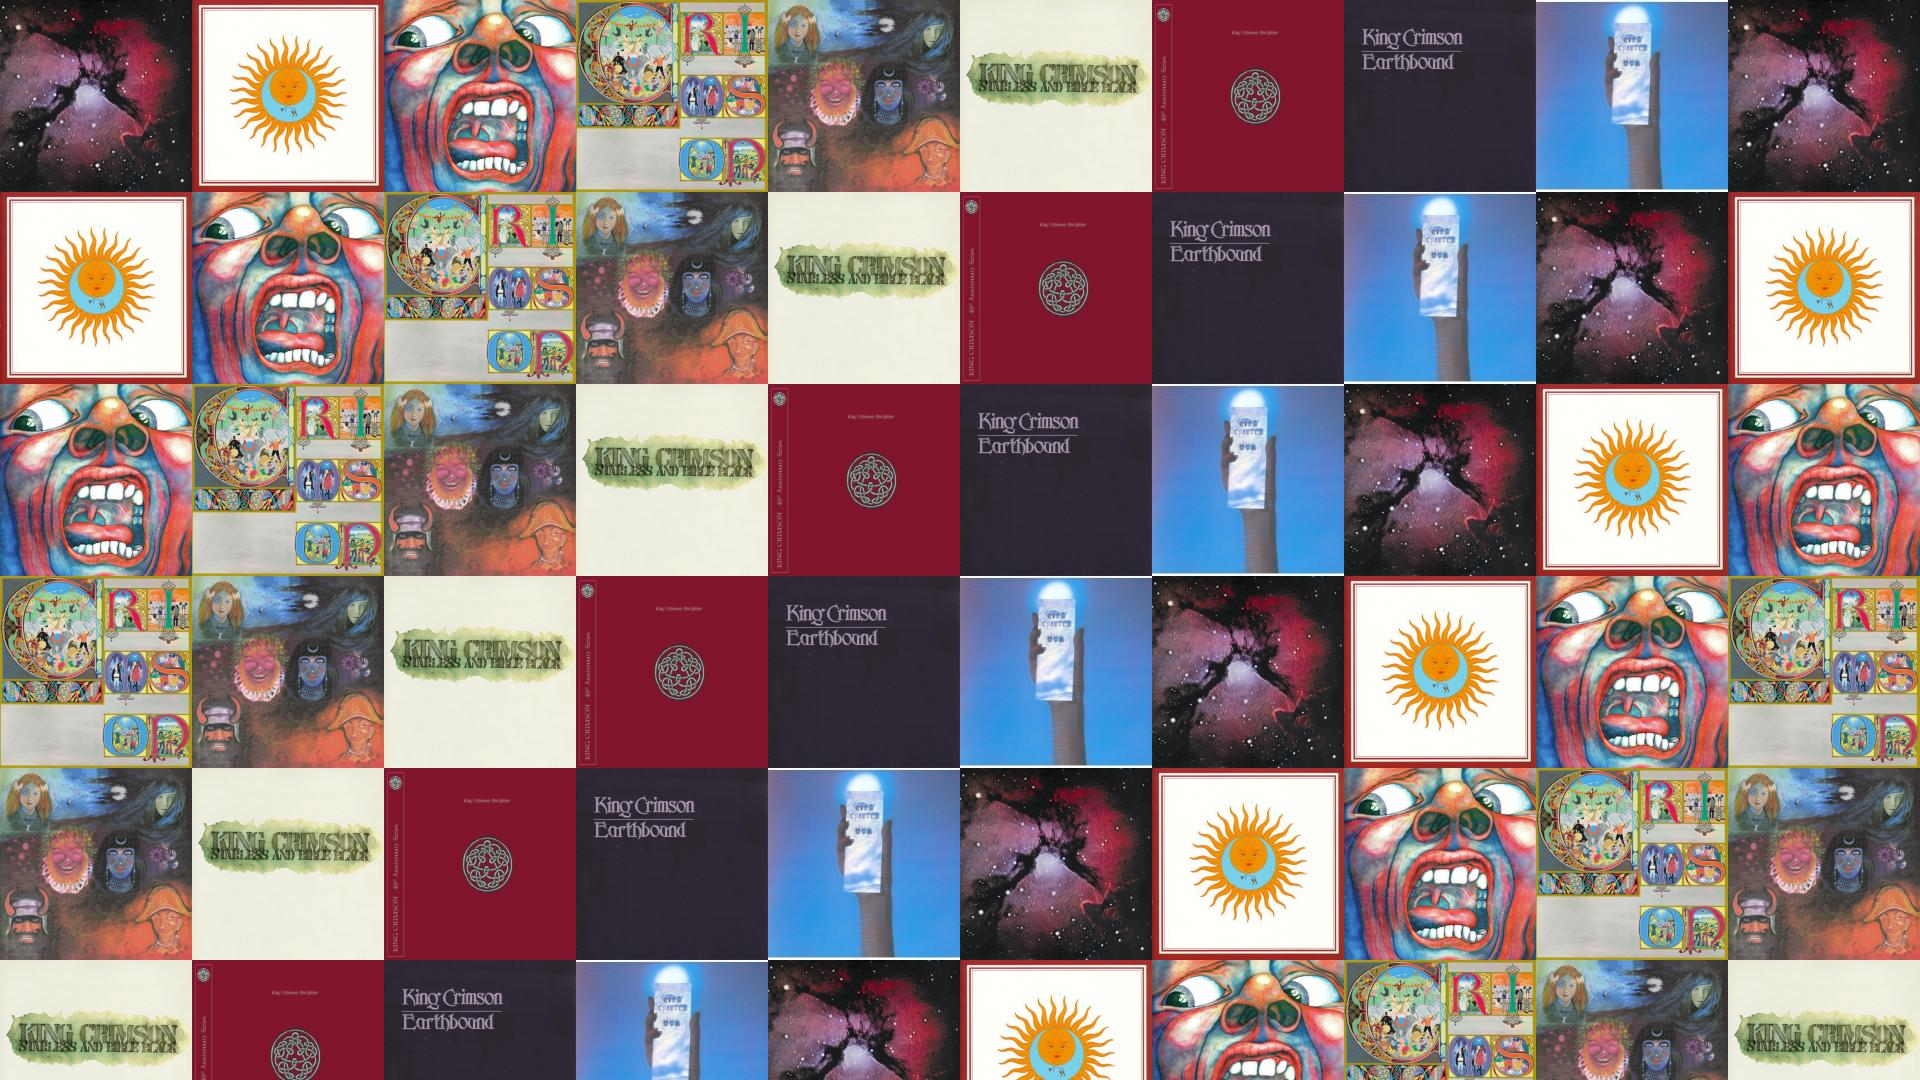 Wallpapers King Crimson Islands Larks Tongues In Aspic 1920x1080